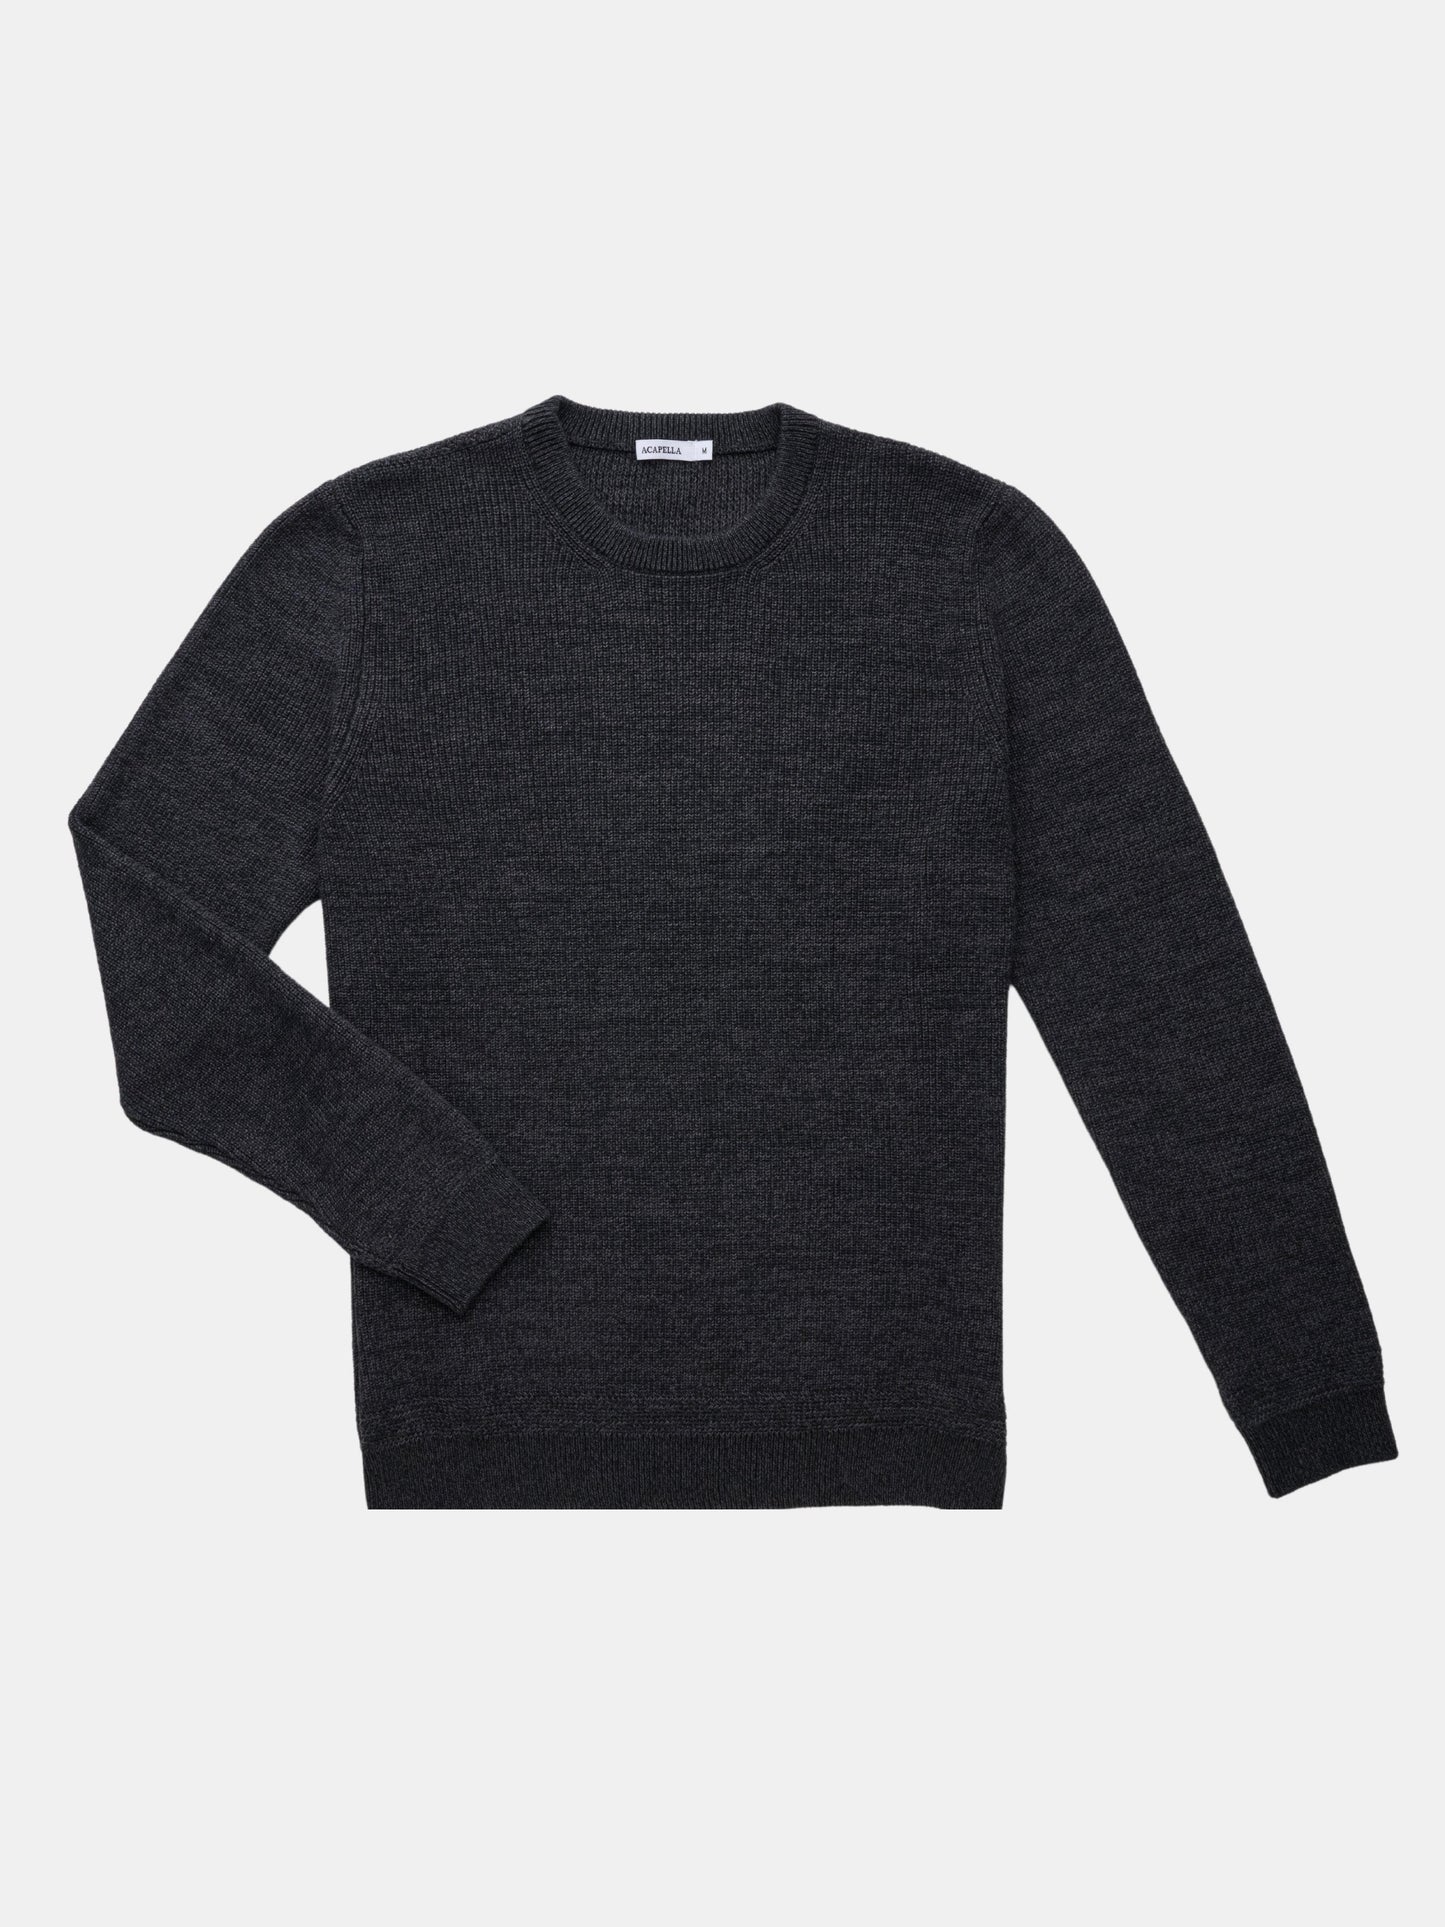 The Perfect Sweater - Midnight Gray